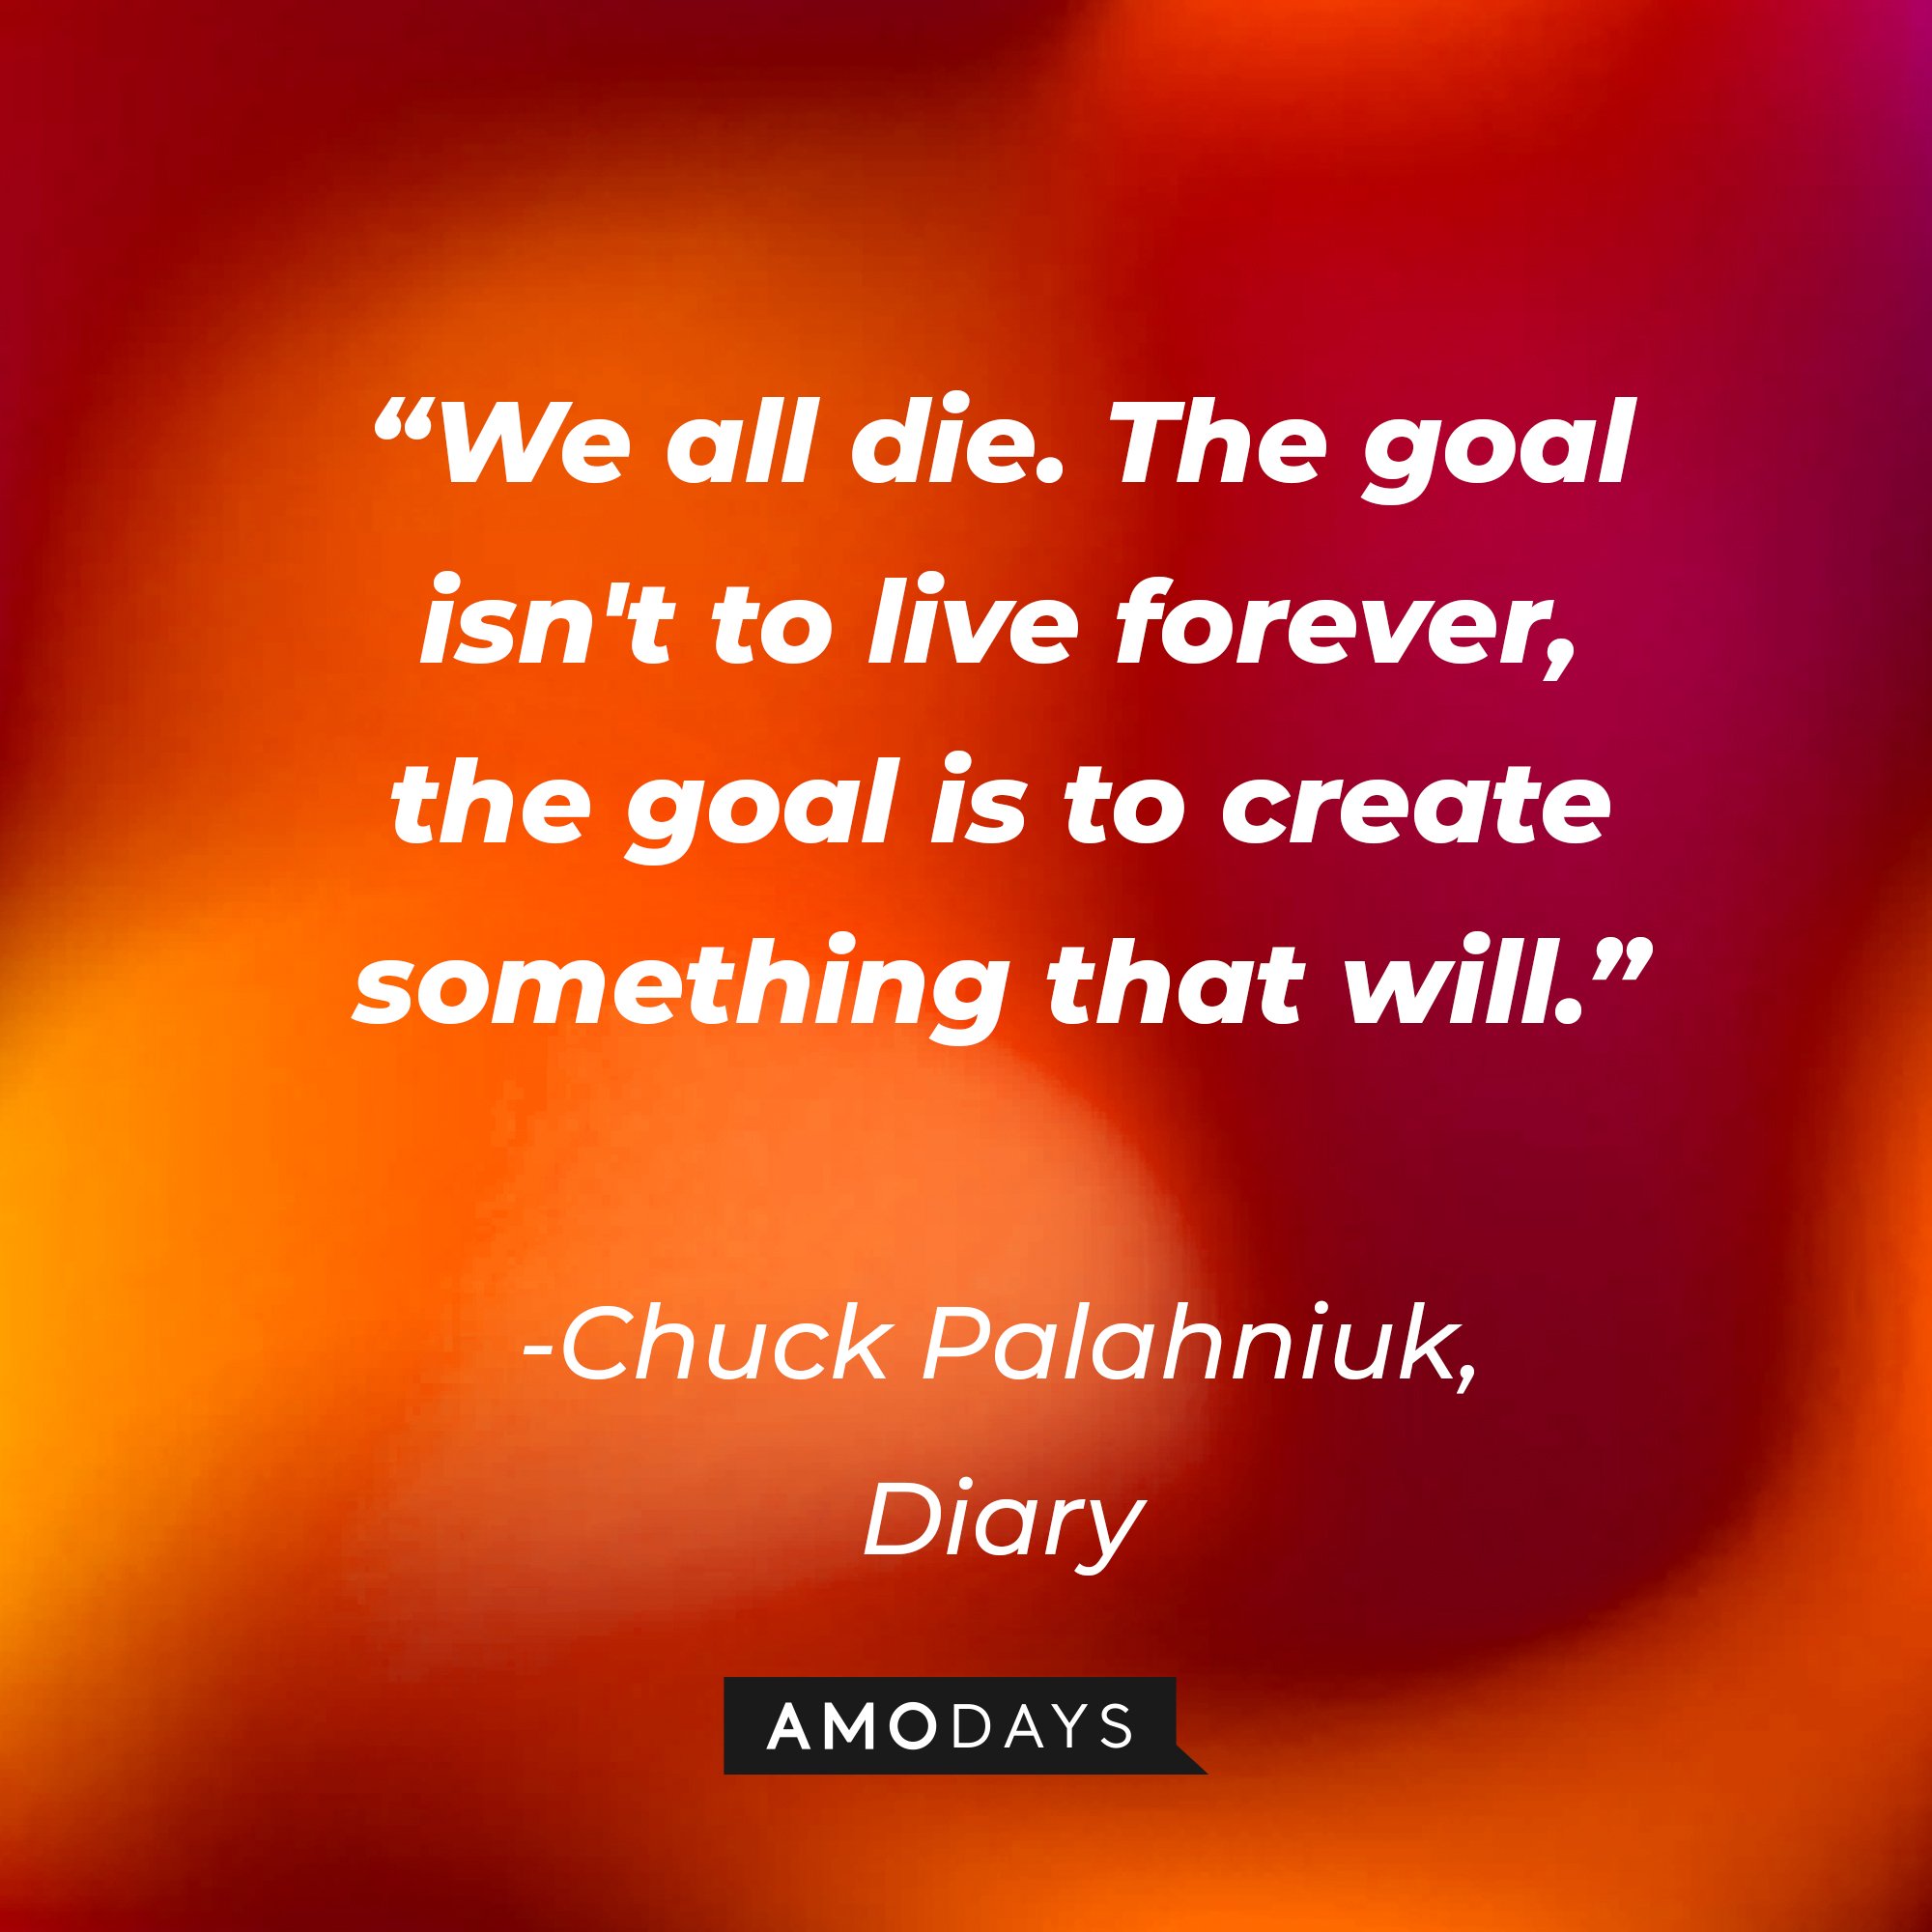 Chuck Palahniuk's quote: "We all die. The goal isn't to live forever, the goal is to create something that will." | Image: Amodays